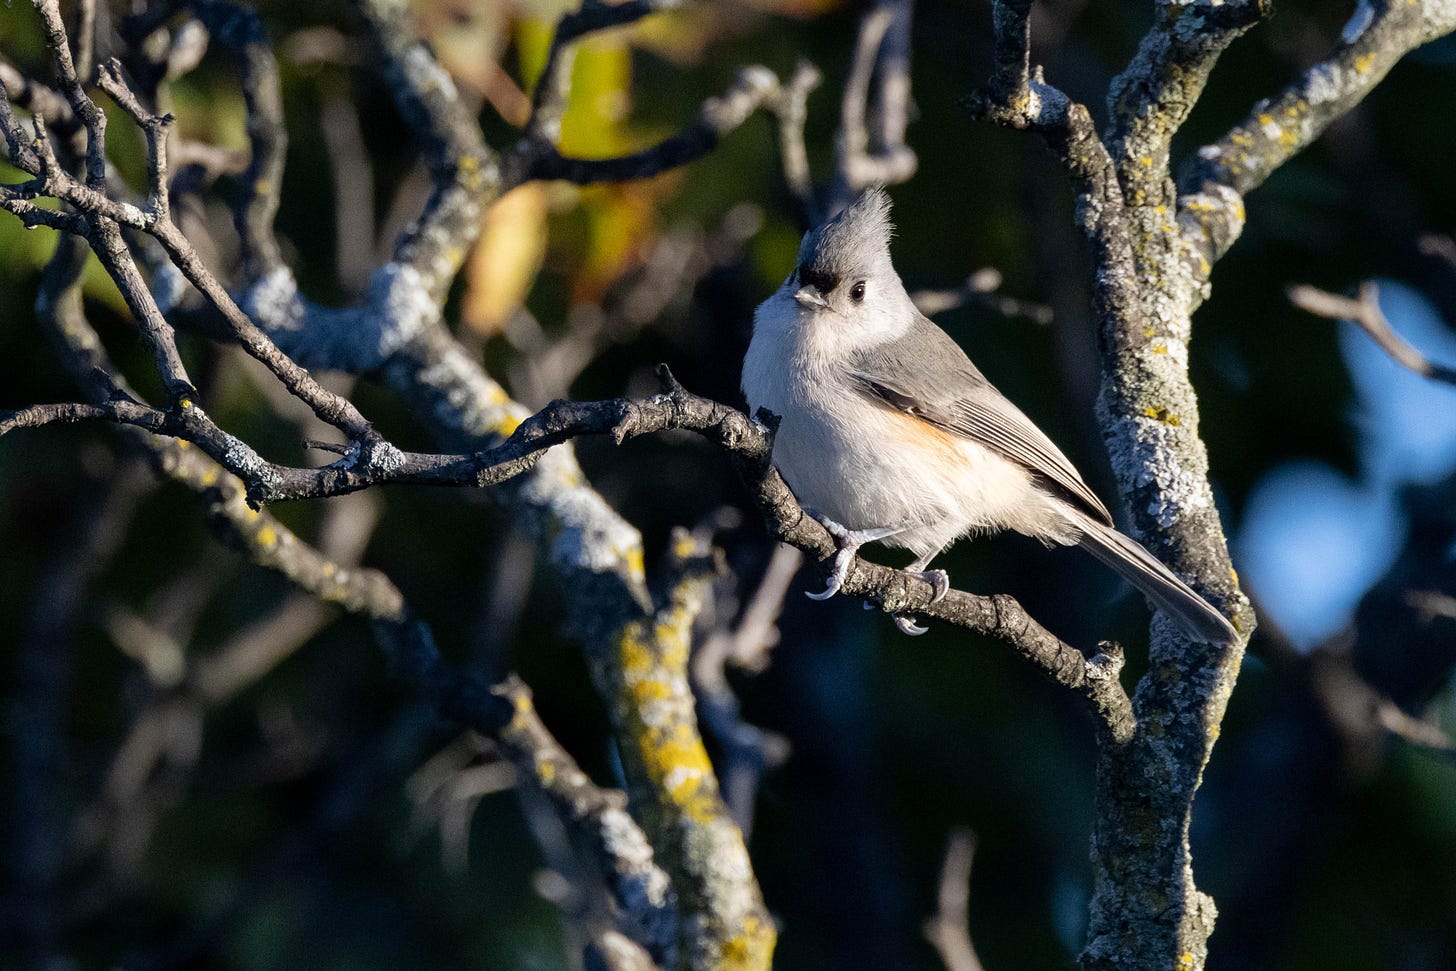 the same bird as the first image, in morning light, hanging onto a horizontal twig on a dead tree branch. It is in the right third of the image, facing left and looking to the left of the viewer. 